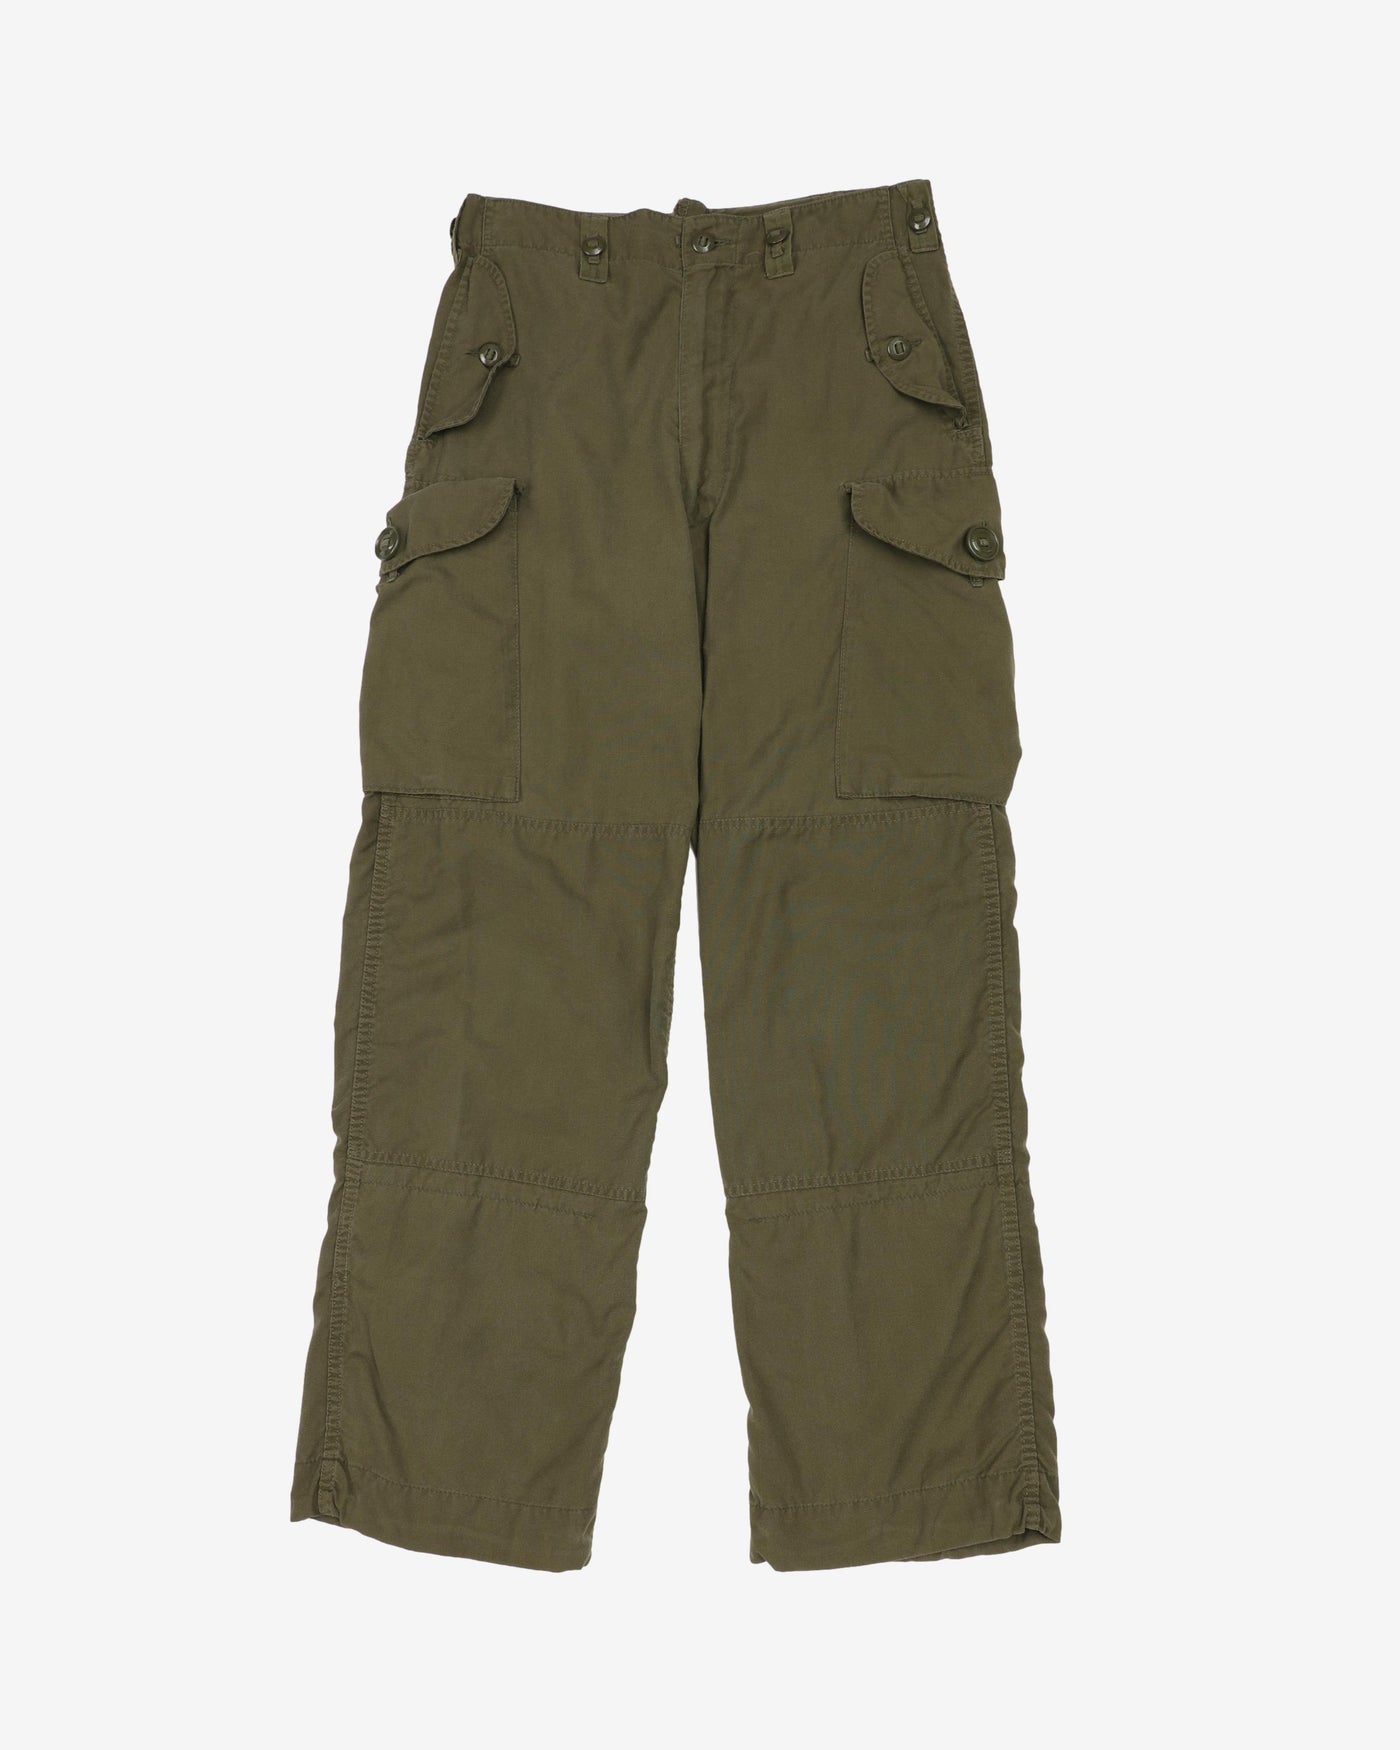 1990s Vintage Canadian Army Lightweight Combat Trousers - 32x31